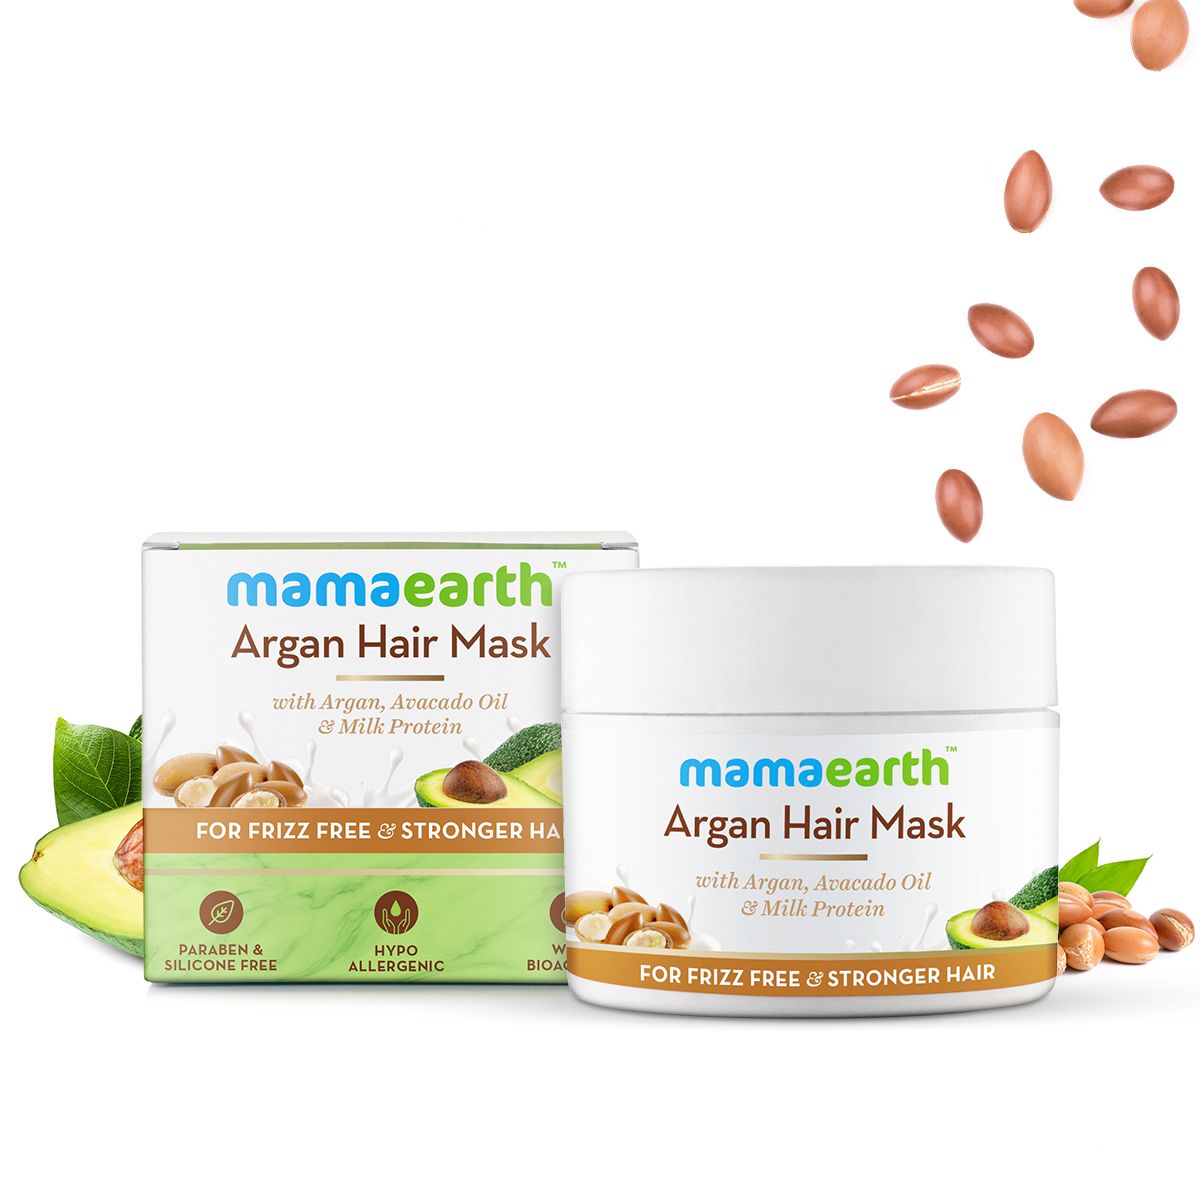 Mamaearth Argan Oil Hair Mask Online For Stronger Frizz-Free Hair